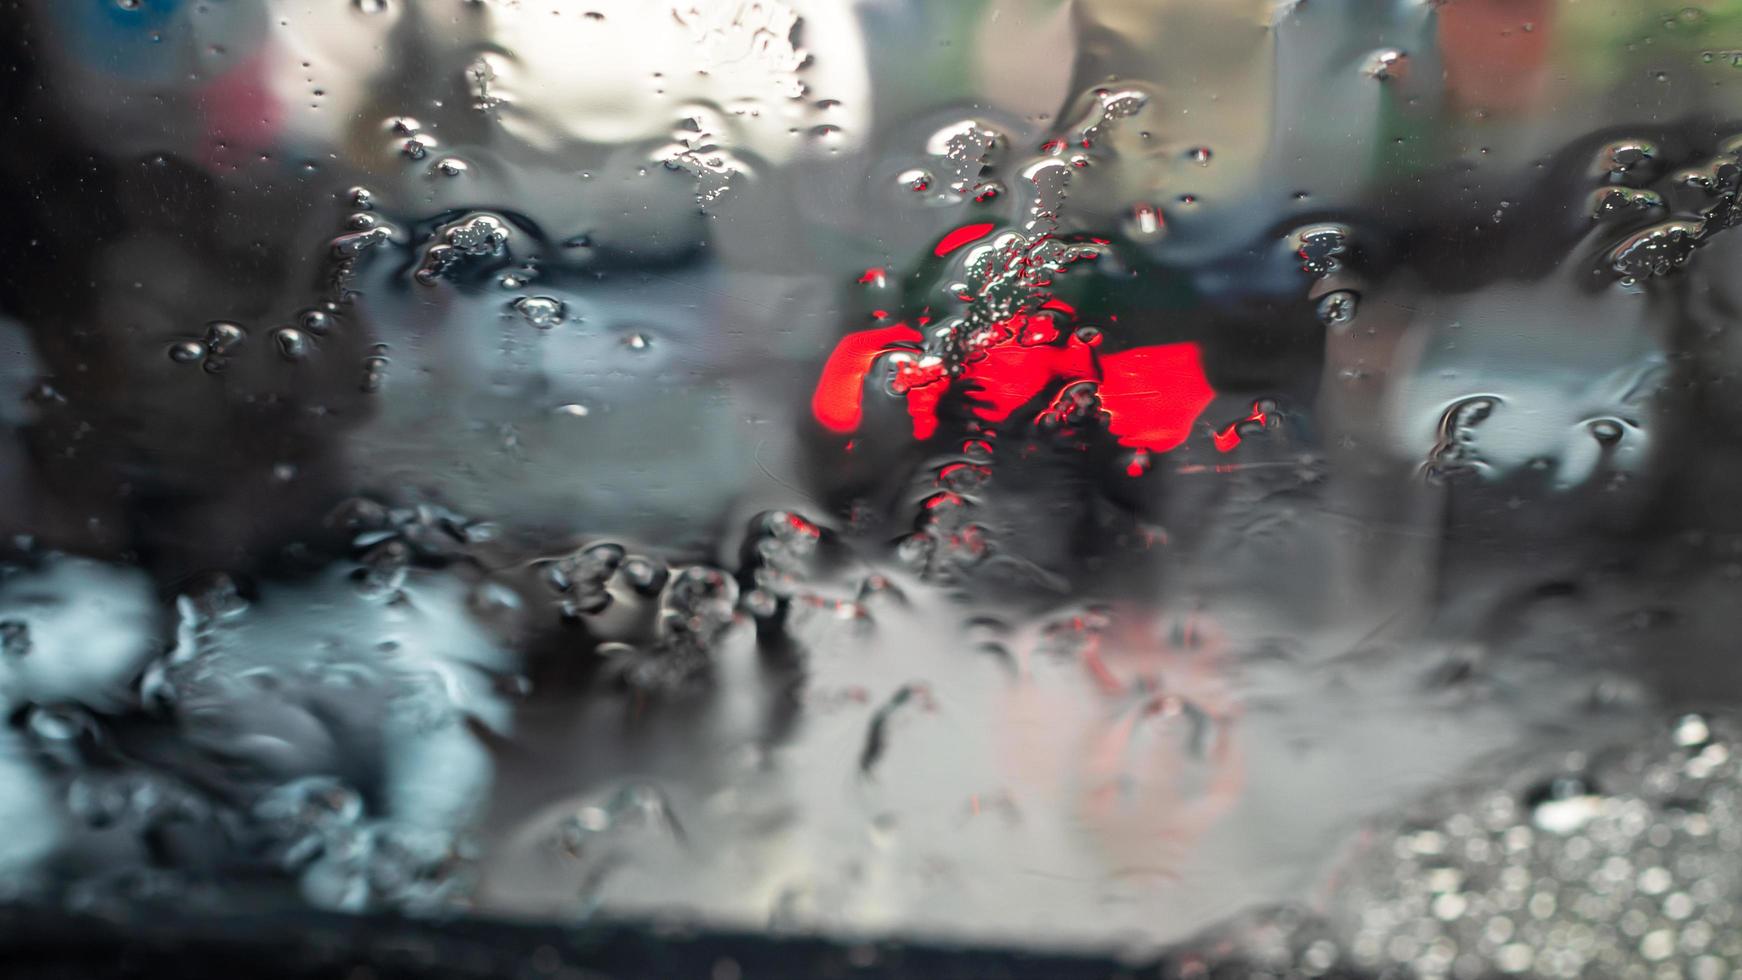 Abstract background blur from a car windshield in looking through many rain drops to the red light at the end of the car, which was parked on the street at night. photo